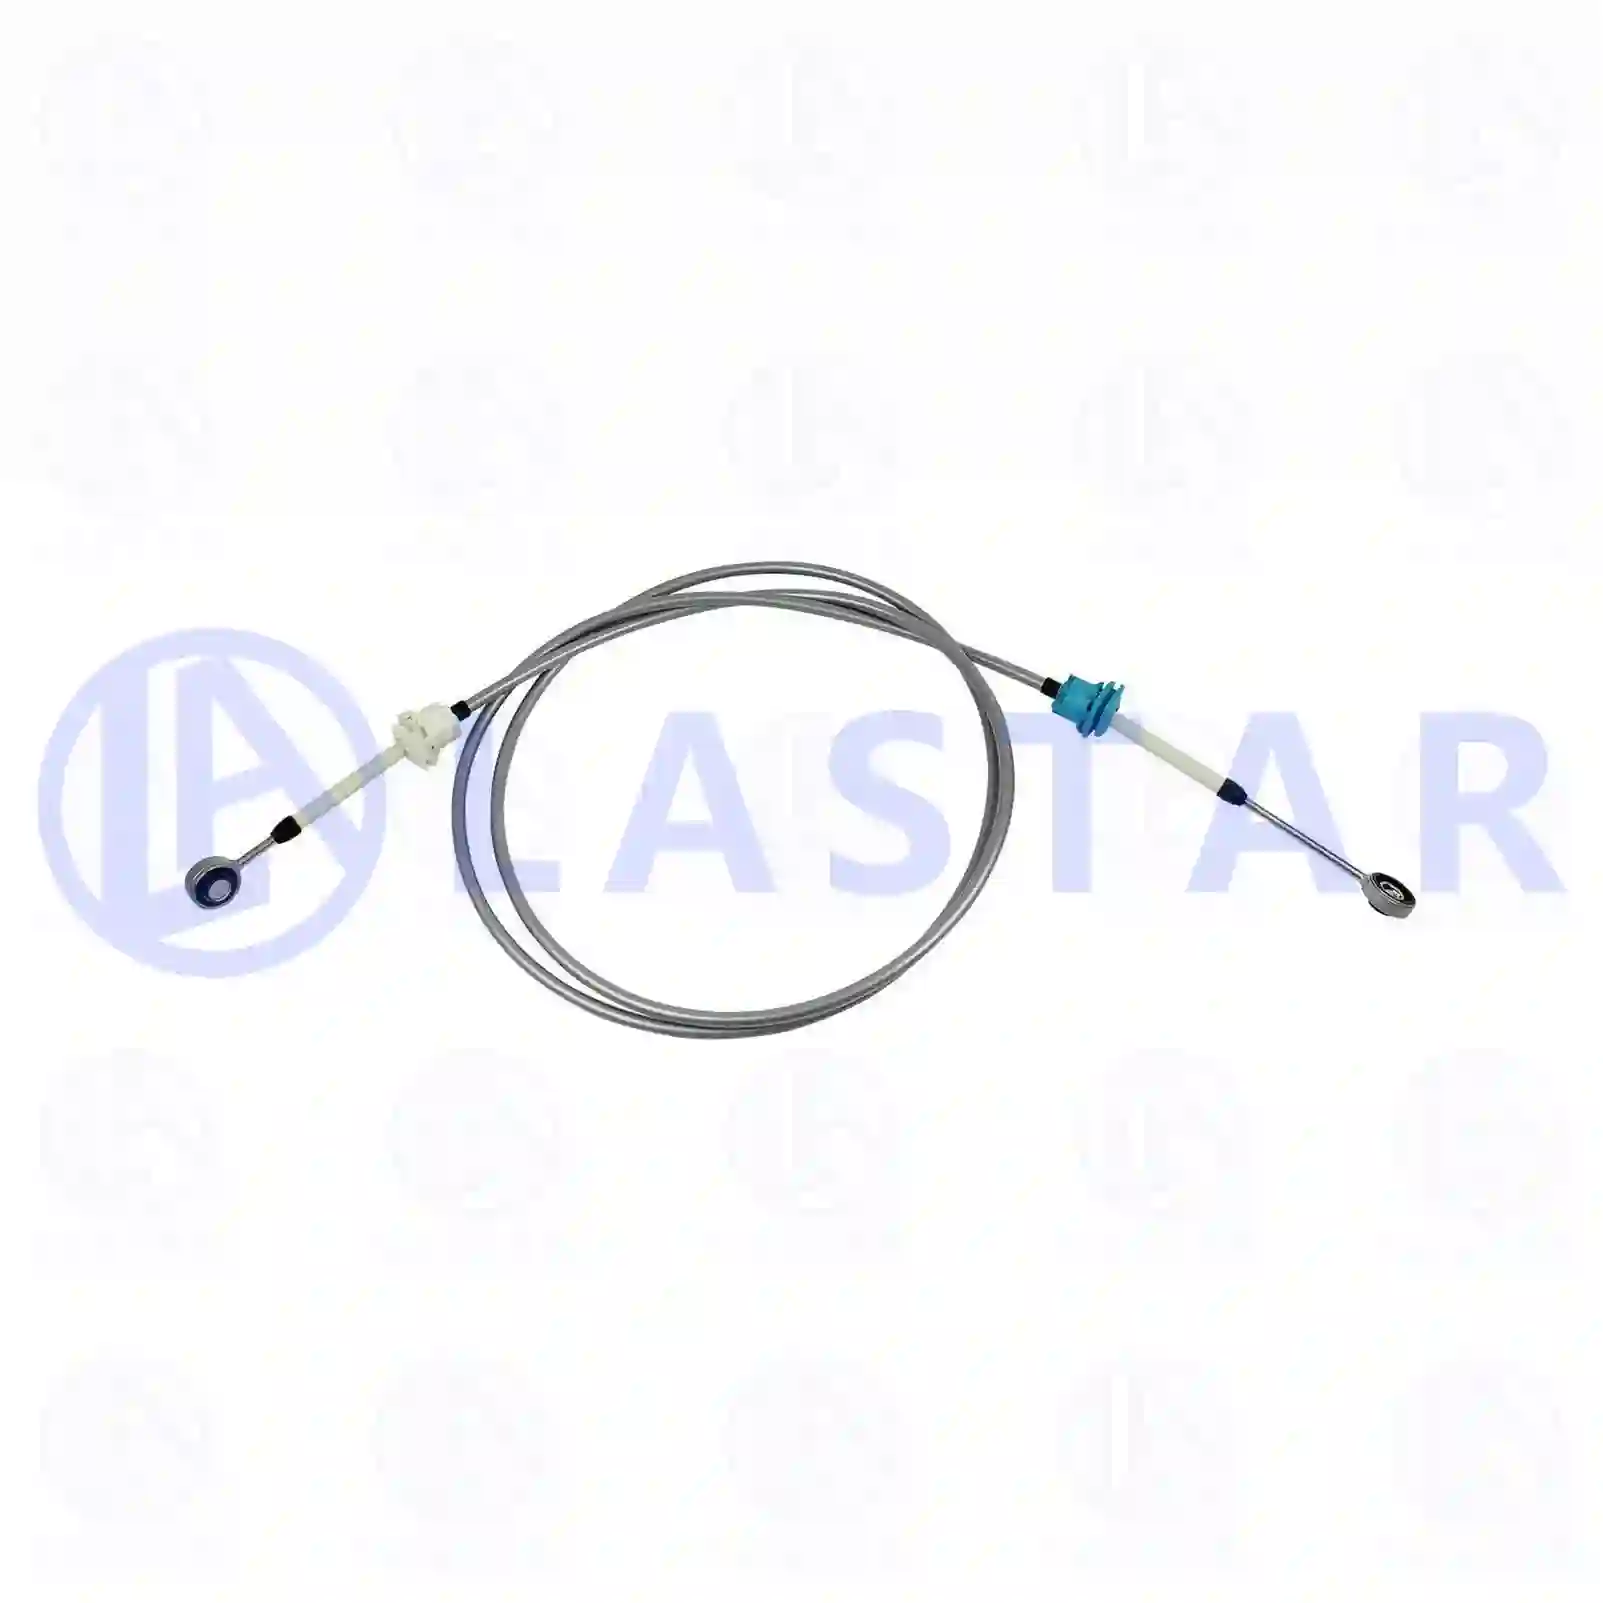 Control cable, switching, 77732242, 20700971, 21002871, 21343571, 21789695 ||  77732242 Lastar Spare Part | Truck Spare Parts, Auotomotive Spare Parts Control cable, switching, 77732242, 20700971, 21002871, 21343571, 21789695 ||  77732242 Lastar Spare Part | Truck Spare Parts, Auotomotive Spare Parts